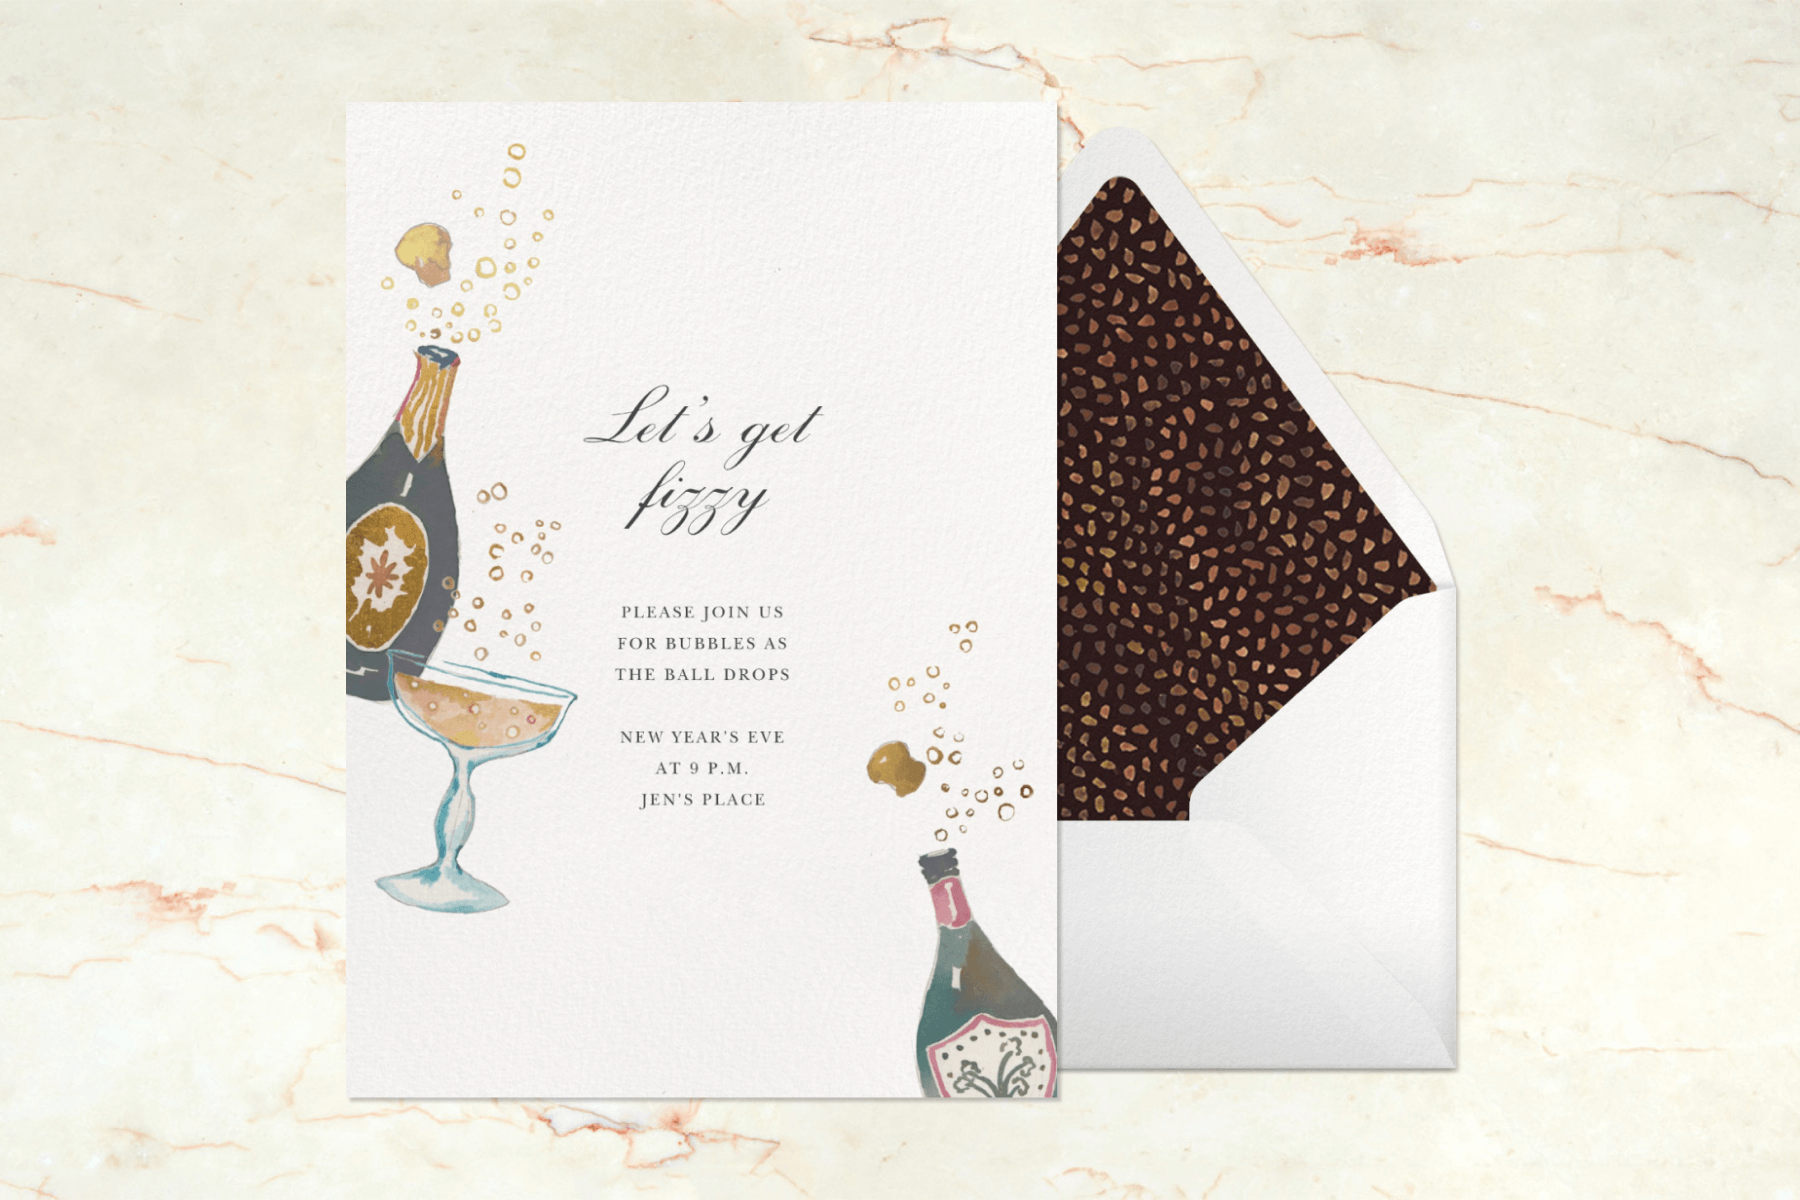 A card with watercolor illustrations of Champagne bottles and coupe glasses reads “Let’s get fizzy” on a marble background.